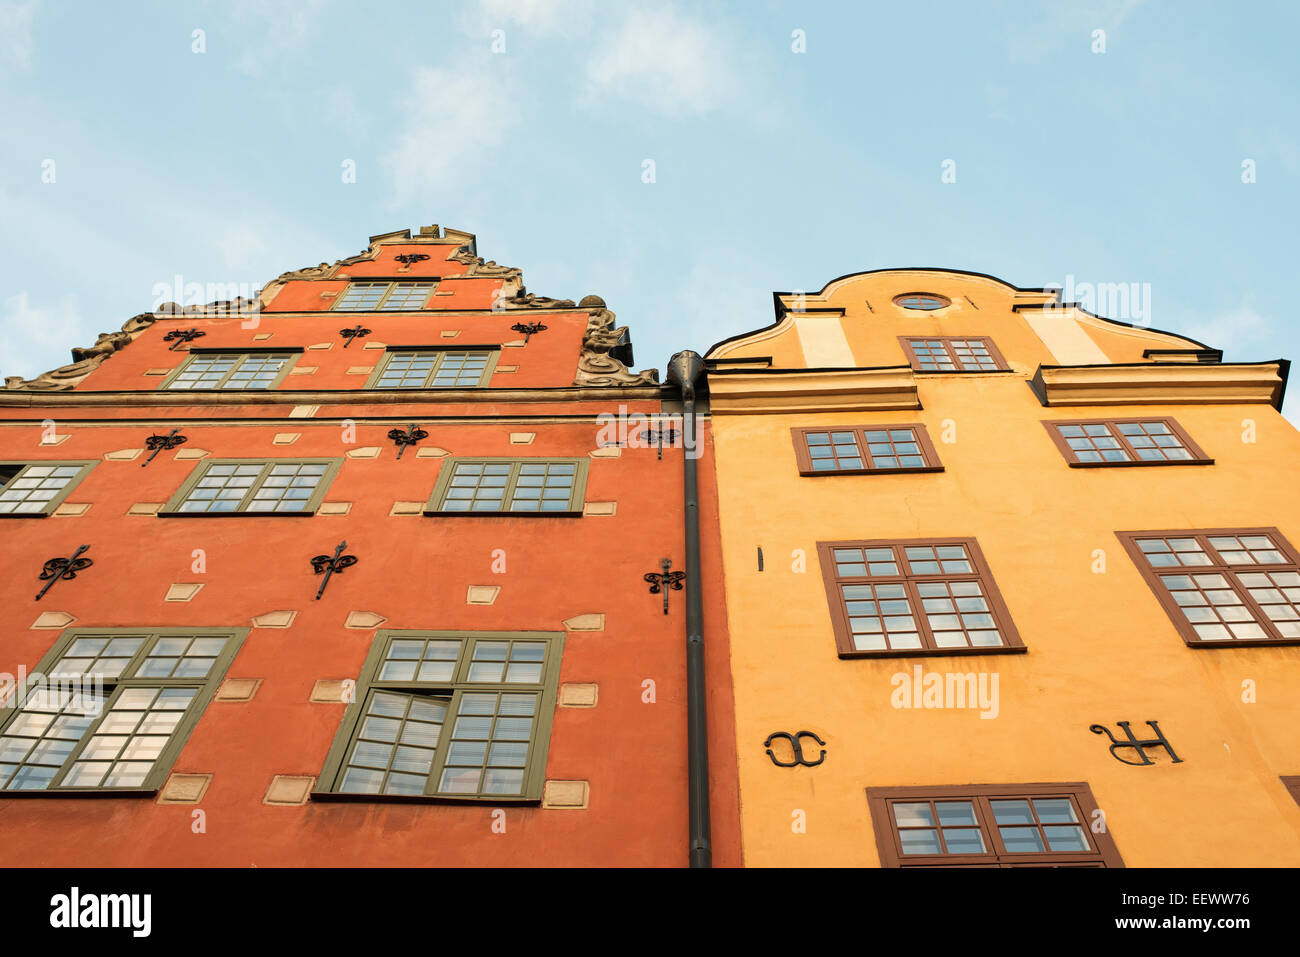 Low angle view of buildings in Old Town Stockholm, Sweden. Stock Photo